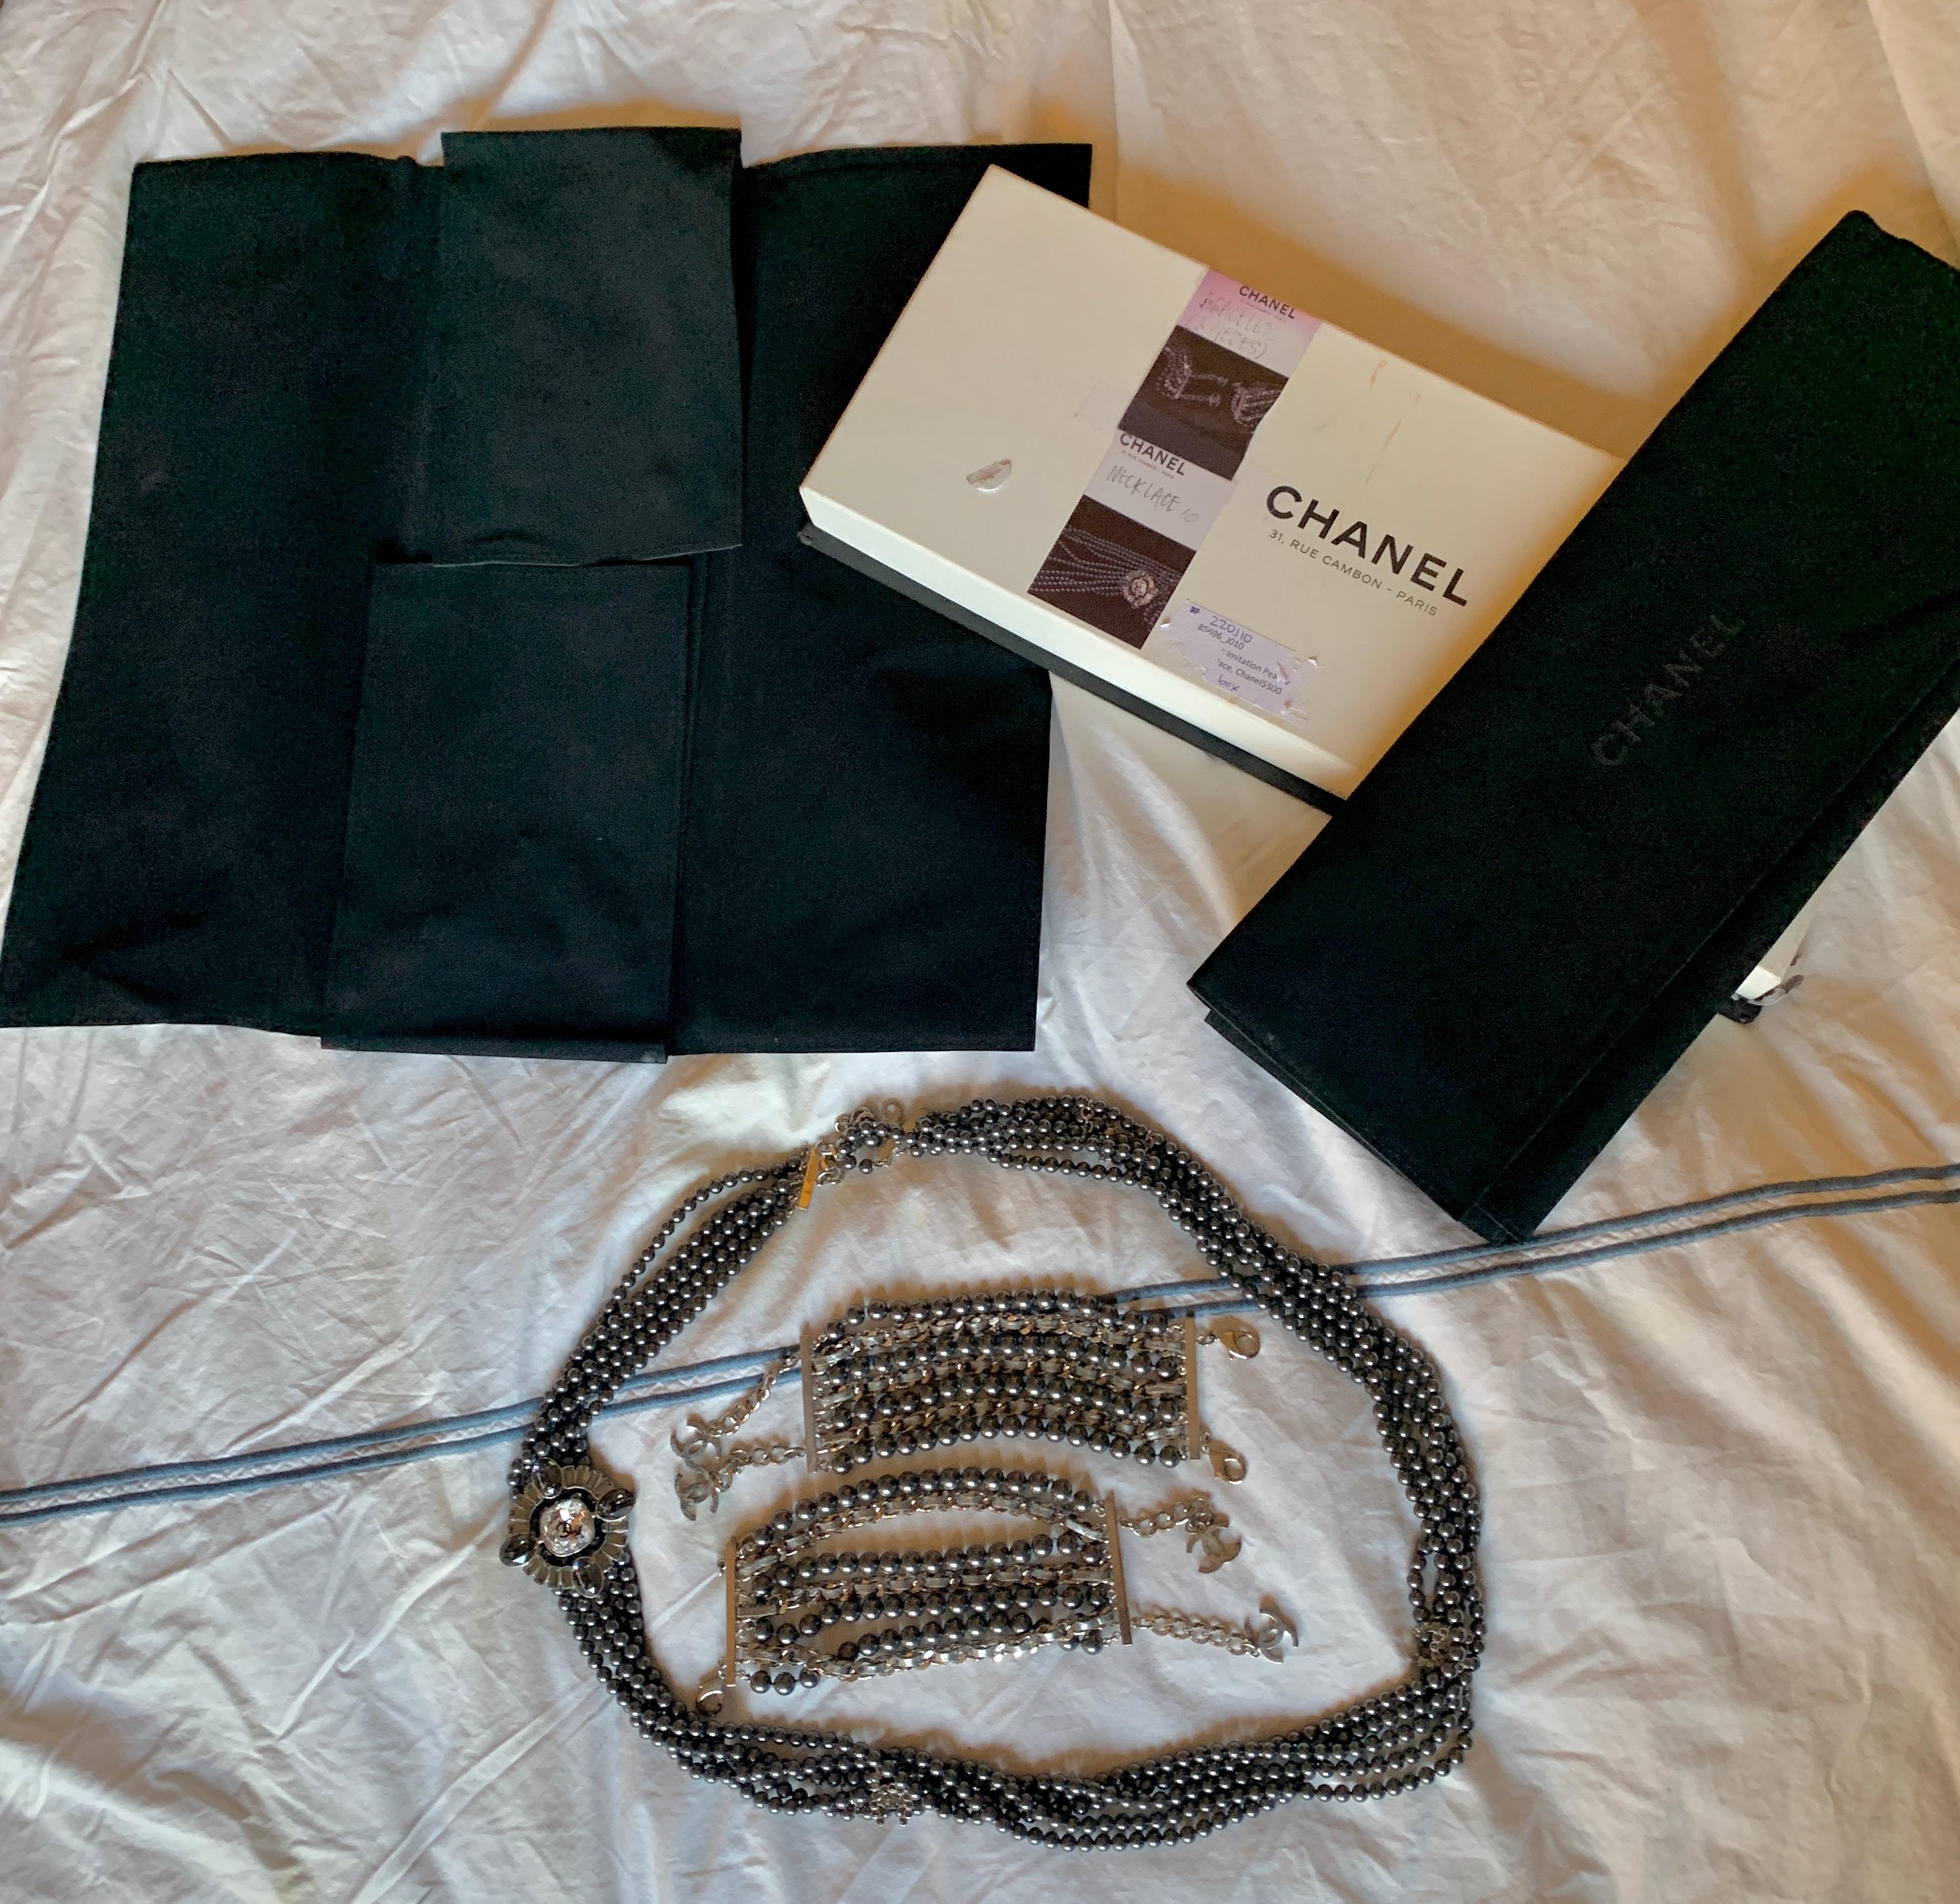 This is a very rare and magnificent Chanel Parure with a 38 inch Chanel CC Multistrand Black Faux Pearl and Rhinestone Necklace and Two Bracelets with the original 2 Chanel pouches and box.
The statement necklace and bracelets feature faux Black